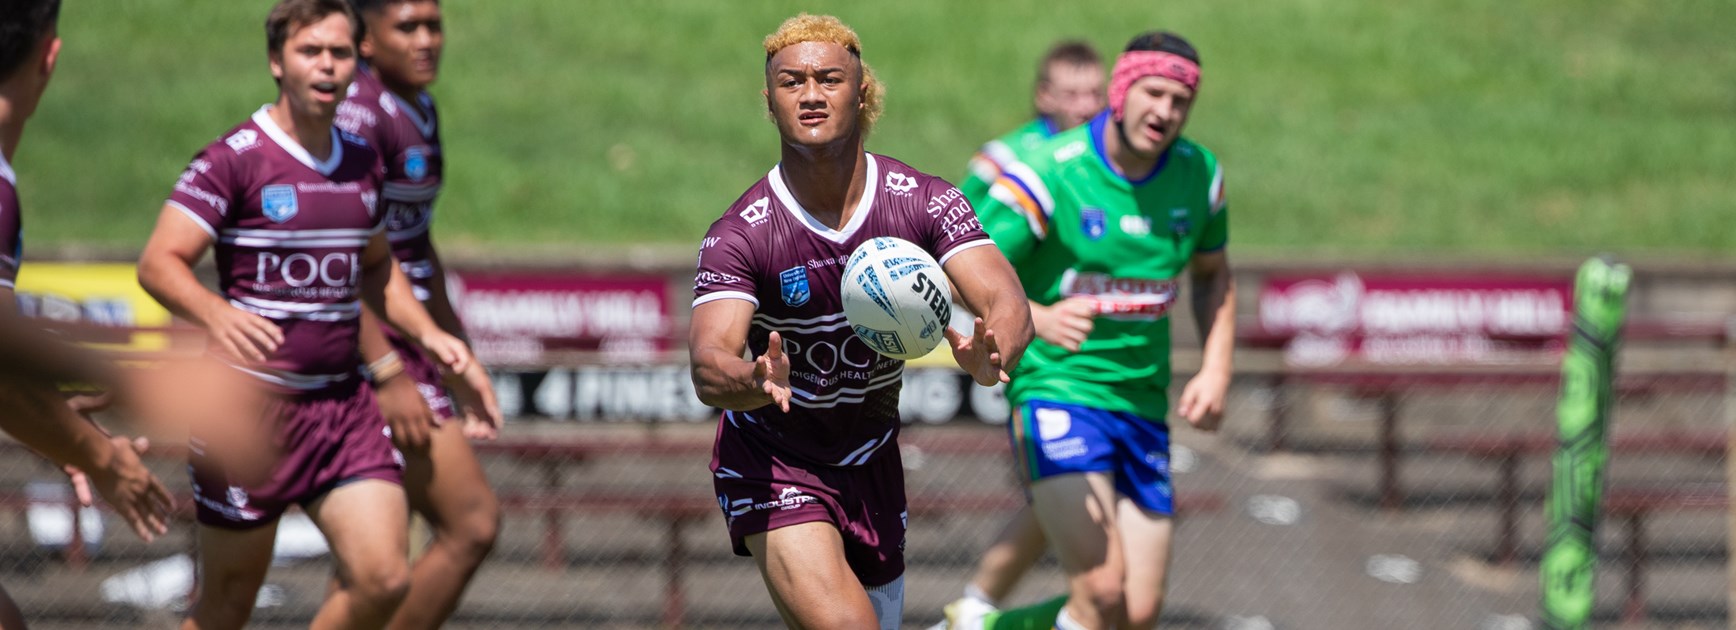 Sea Eagles brave in hard fought loss to Raiders